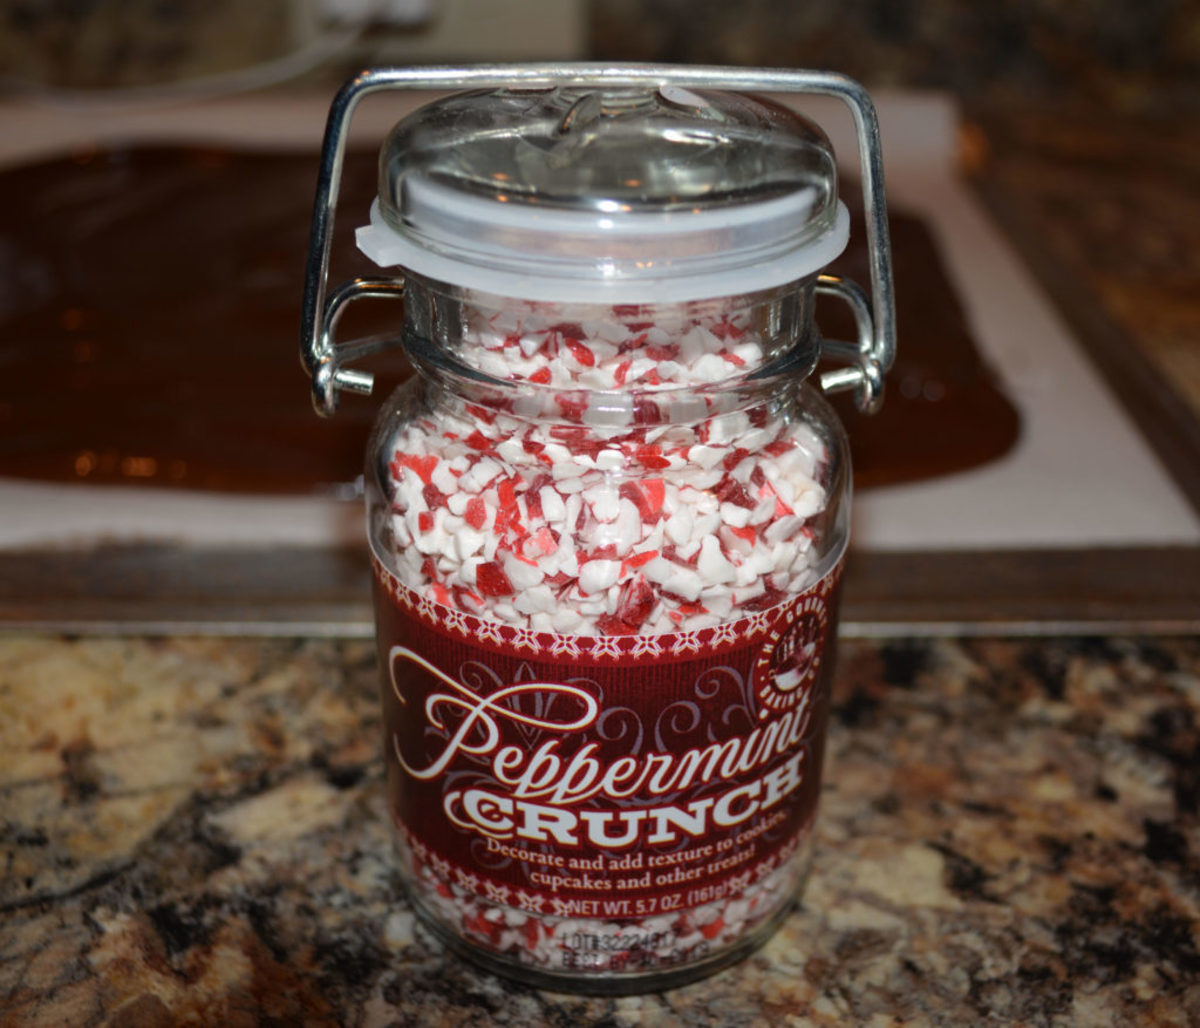 These cute little jars of crushed peppermint were available for a few years, then they were gone, too.